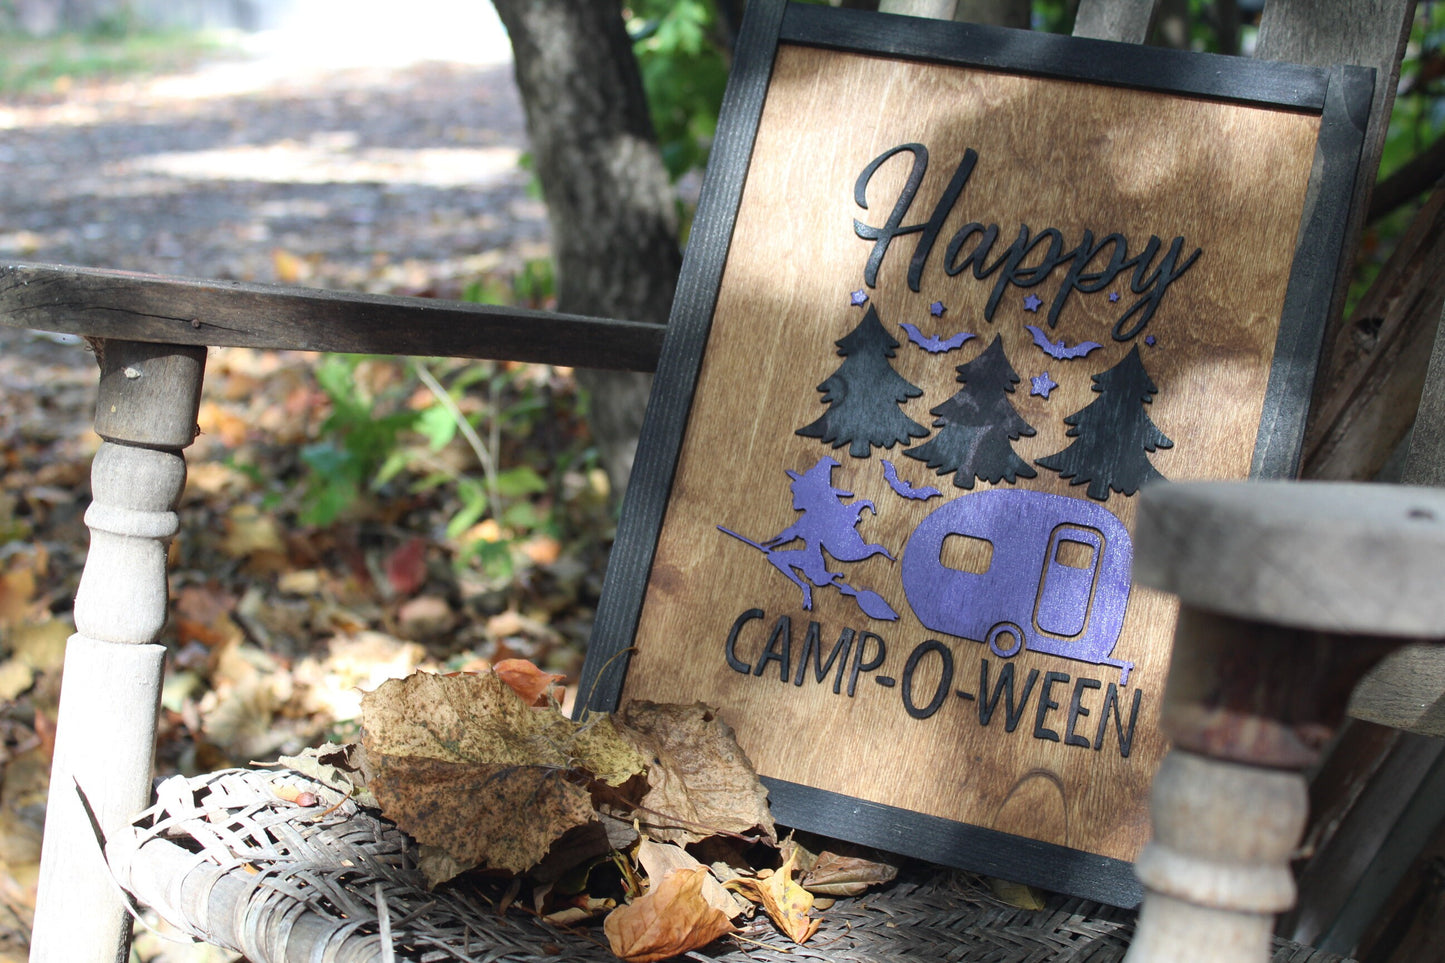 Happy Camper Halloween Black frame Wooden Sign Purple Witch Trees October Autumn Fall Decoration Rustic Funny Saying Camping 3D Lettering